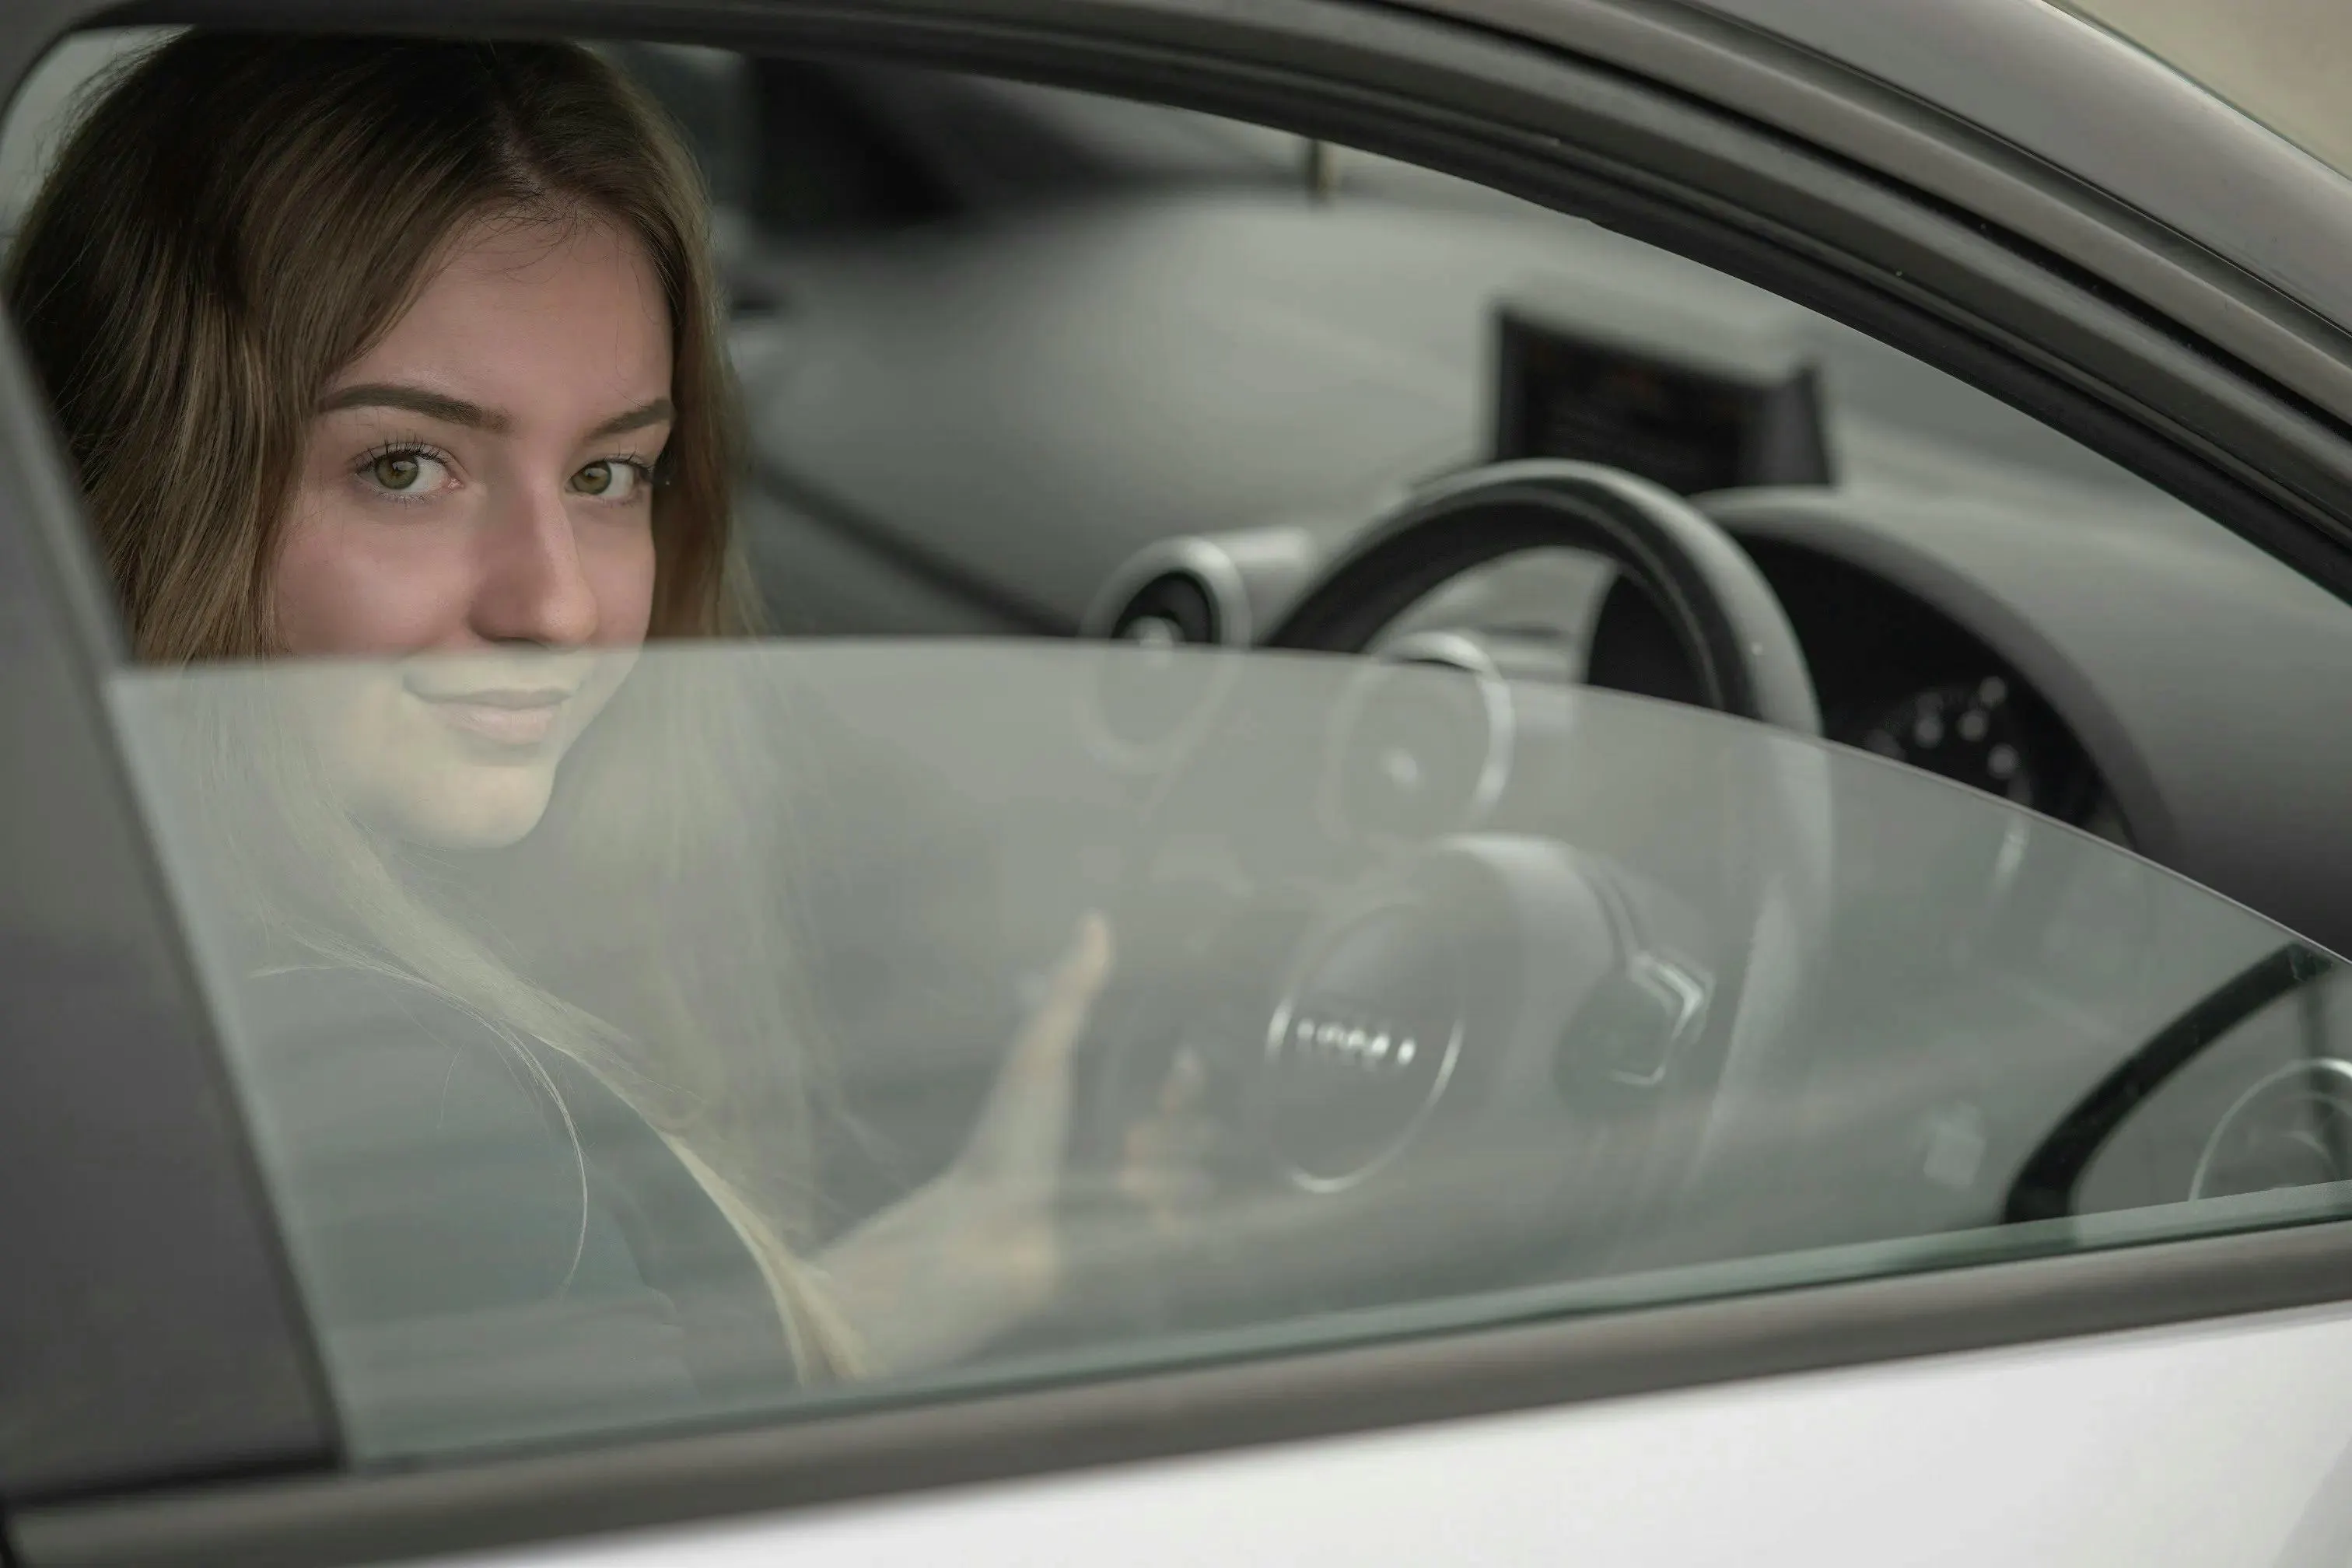 A female learner driver taking an Intensive Driving Course